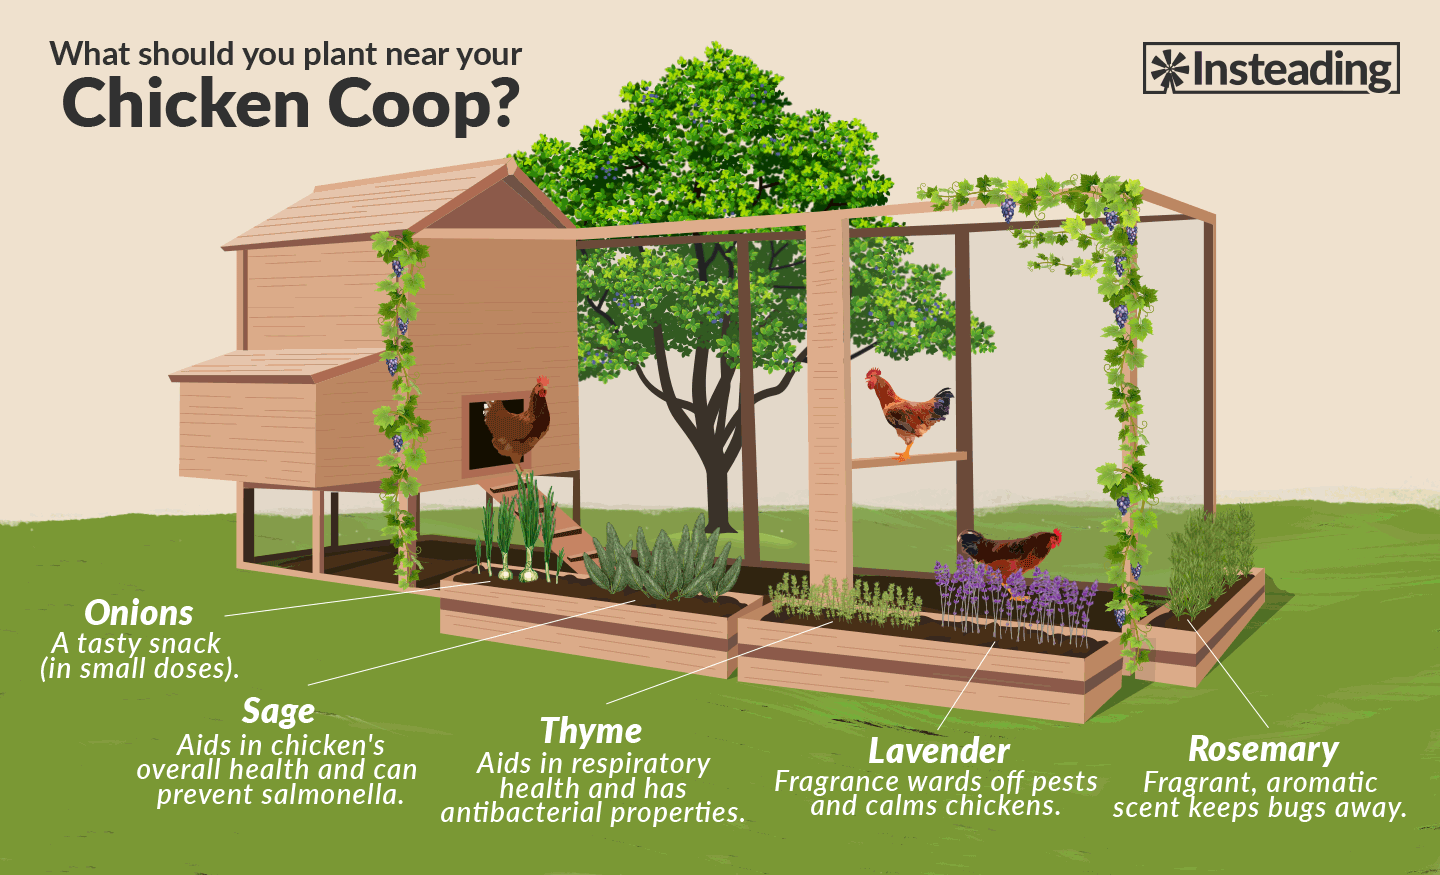 12 Chicken-Friendly Plants To Grow Next To Coops • Insteading